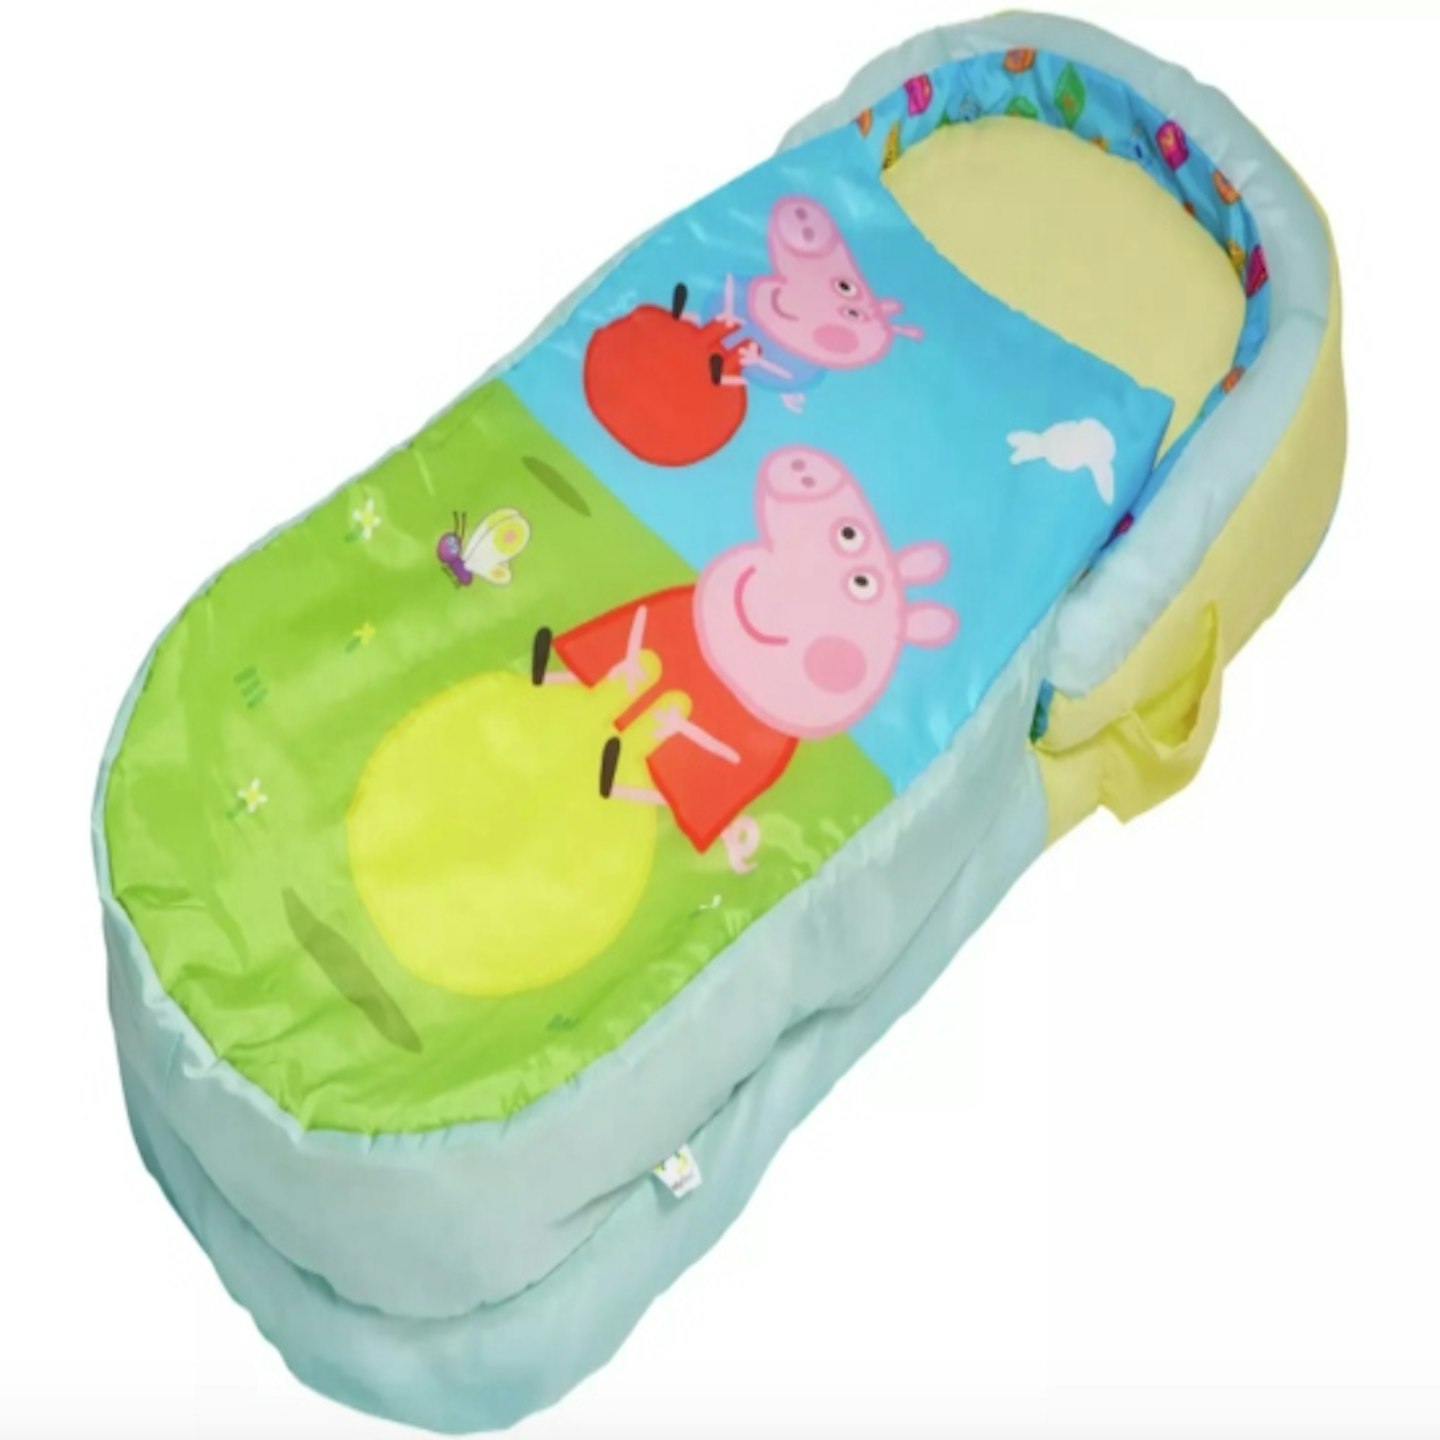 Peppa Pig My First ReadyBed Kids Air Bed and Sleeping Bag 